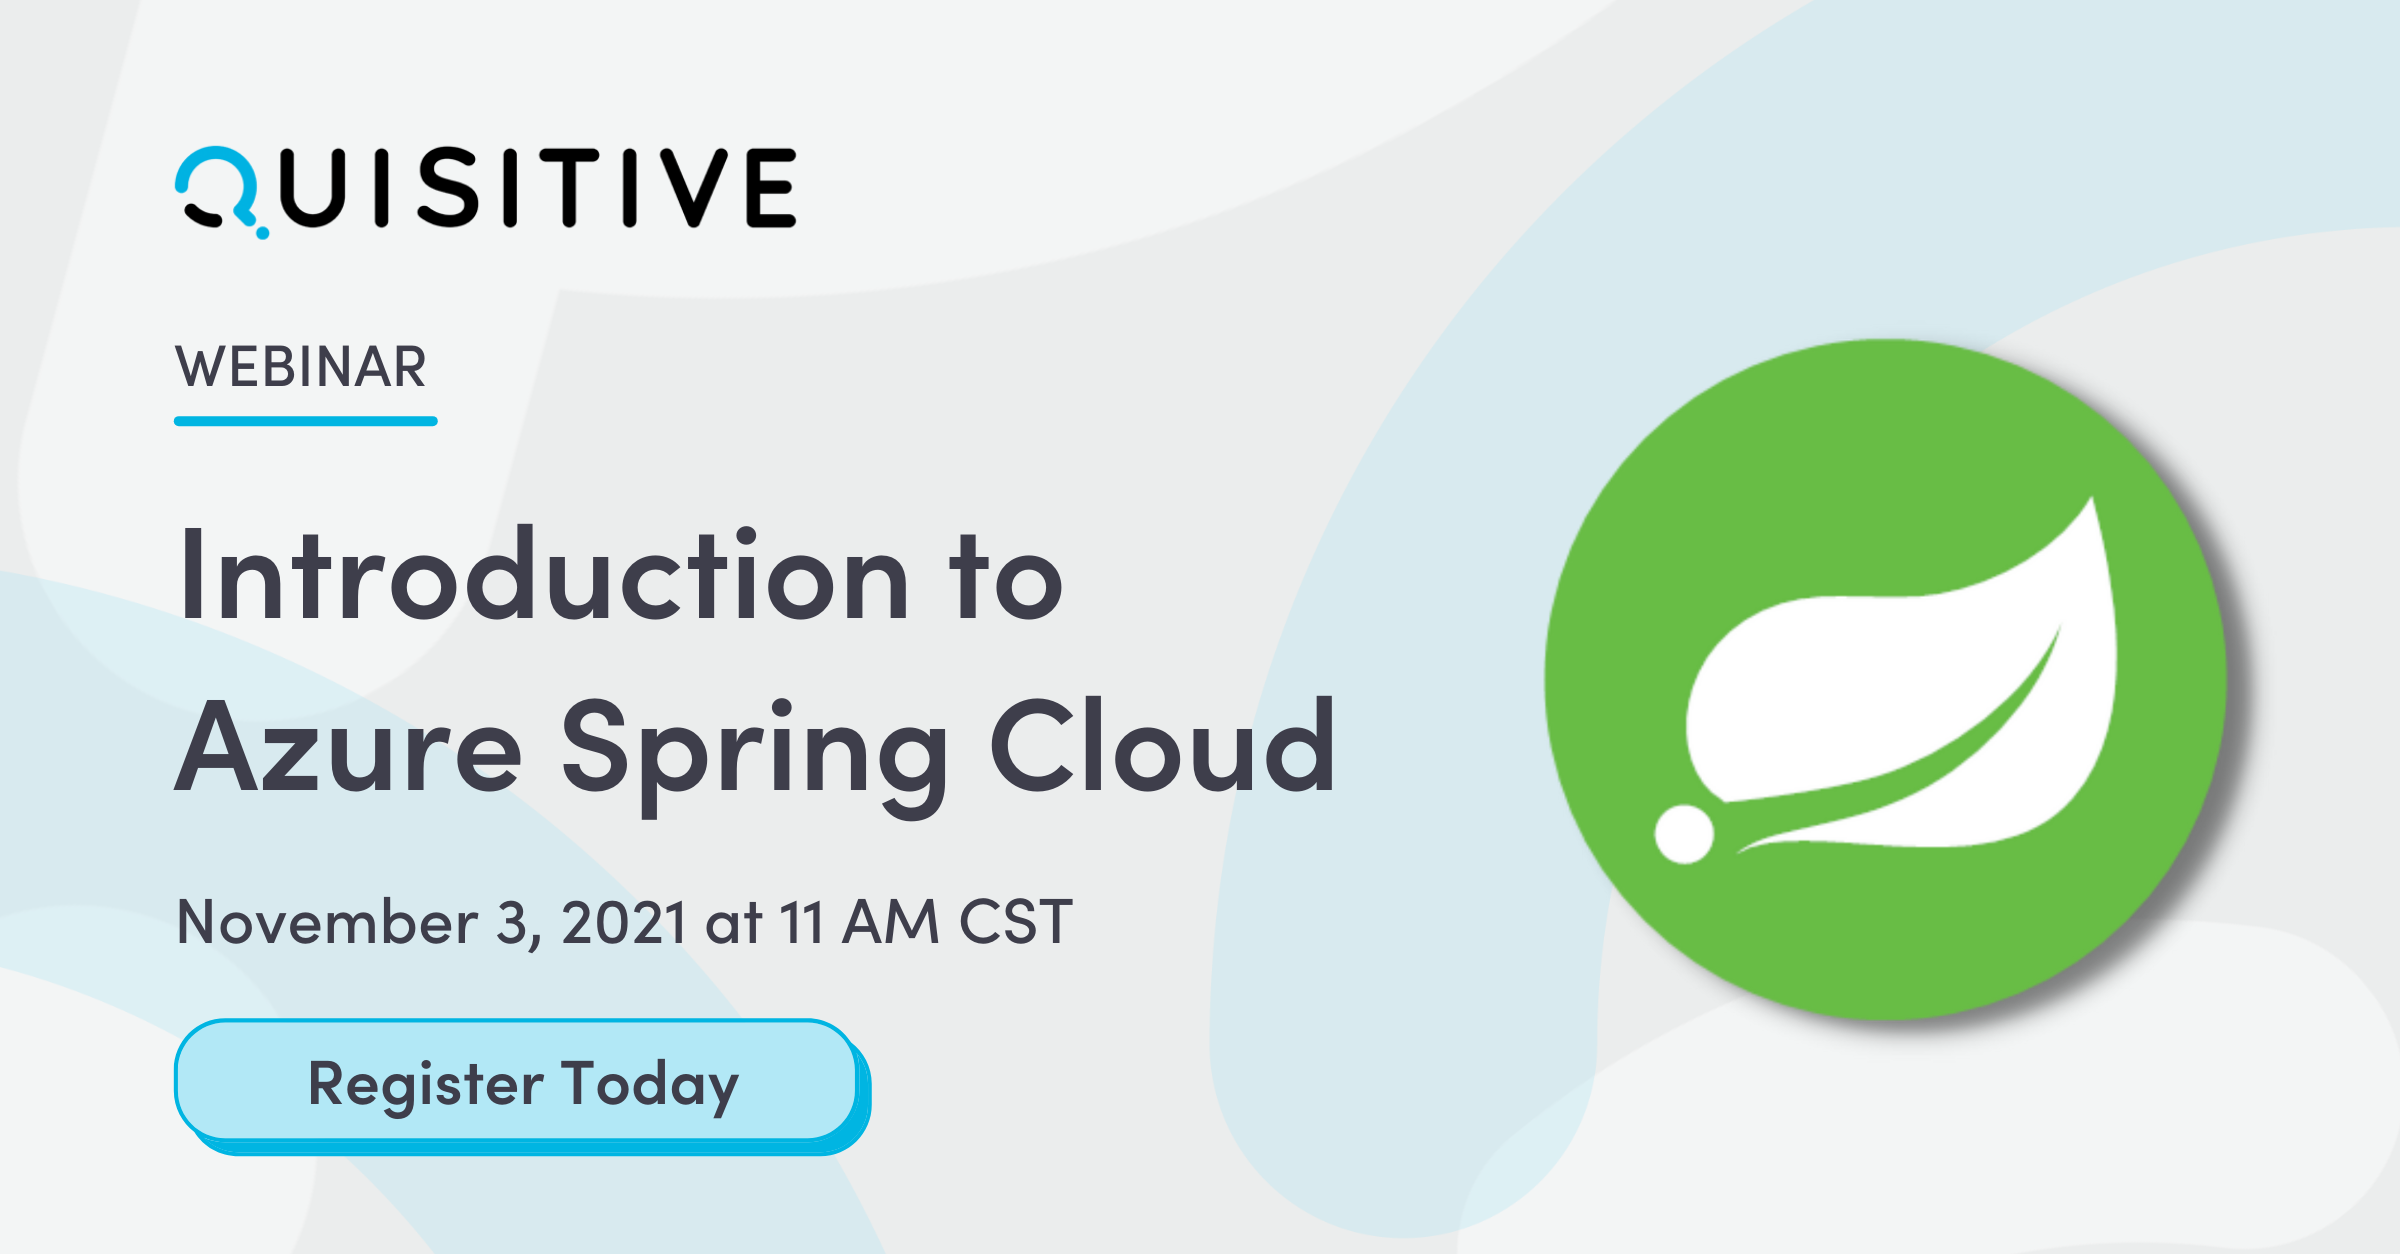 Introduction to Azure Spring Cloud Webinar, November 3, 2021 at 11 AM CST. Register Today